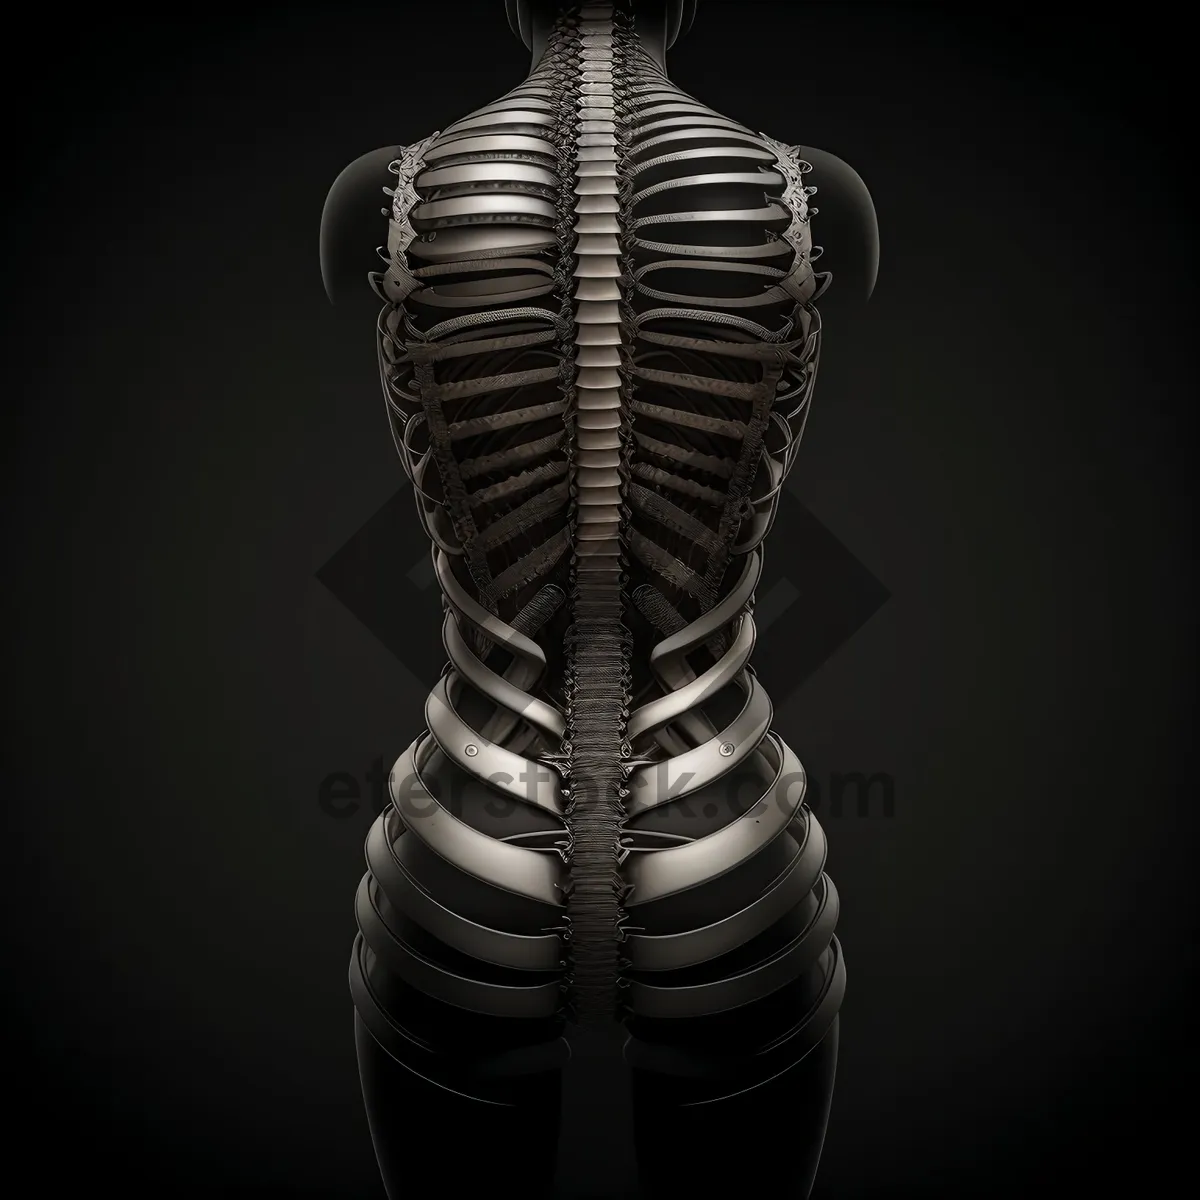 Picture of Skeletal anatomy of a bodybuilder's spine and torso